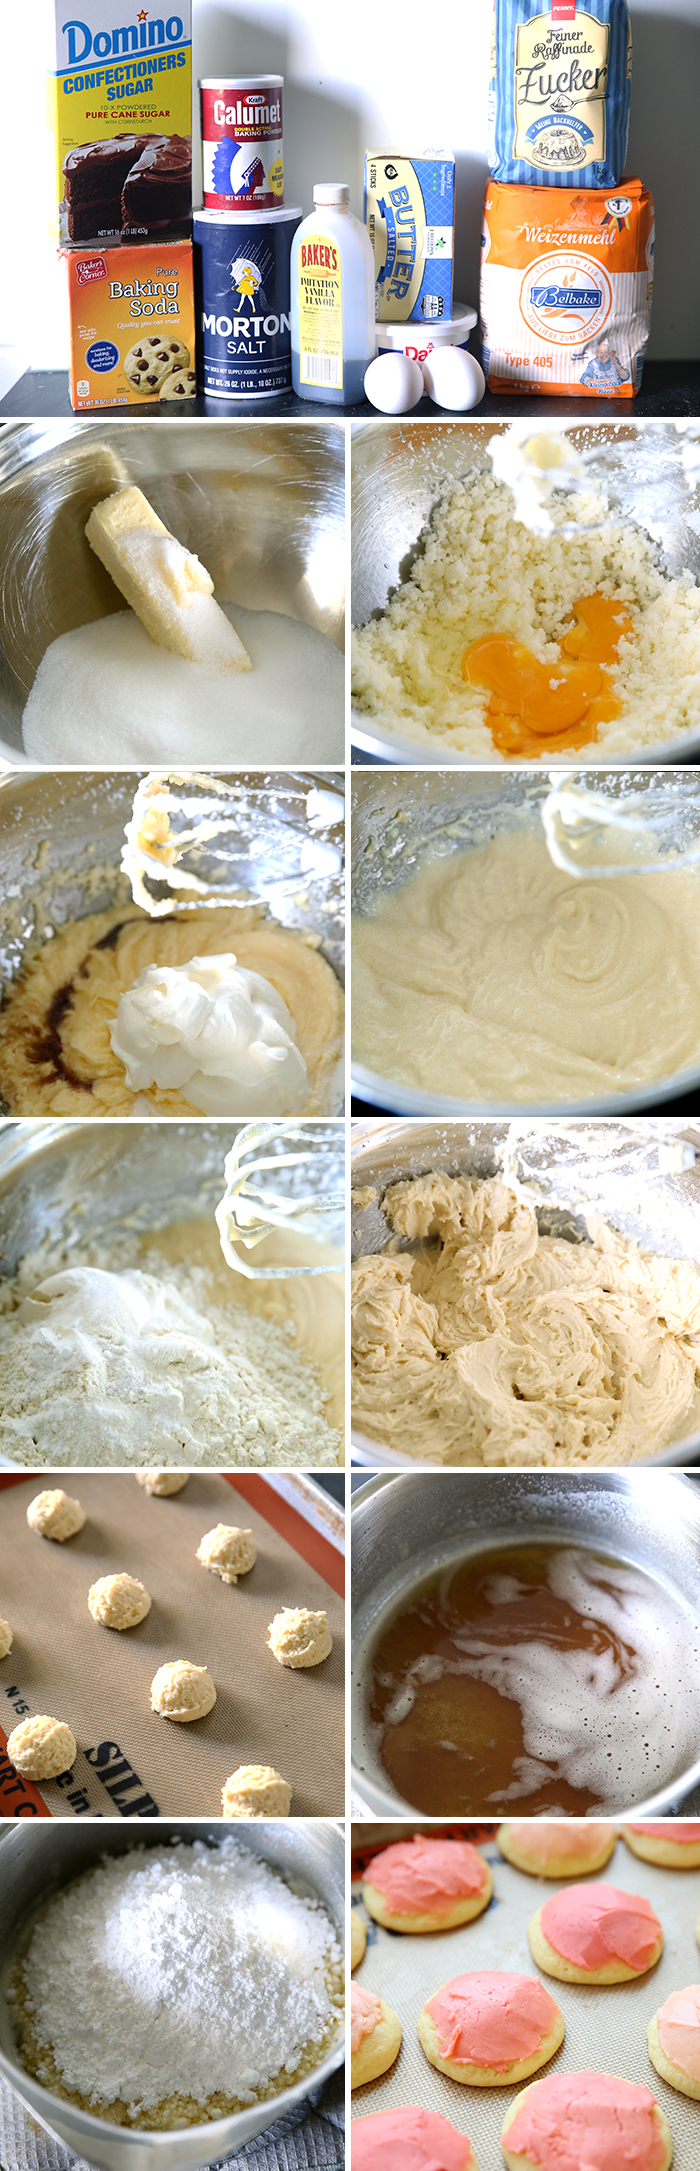 step by step instructional pictures for making sour cream drop sugar cookies. There are 11 pictures in the collage